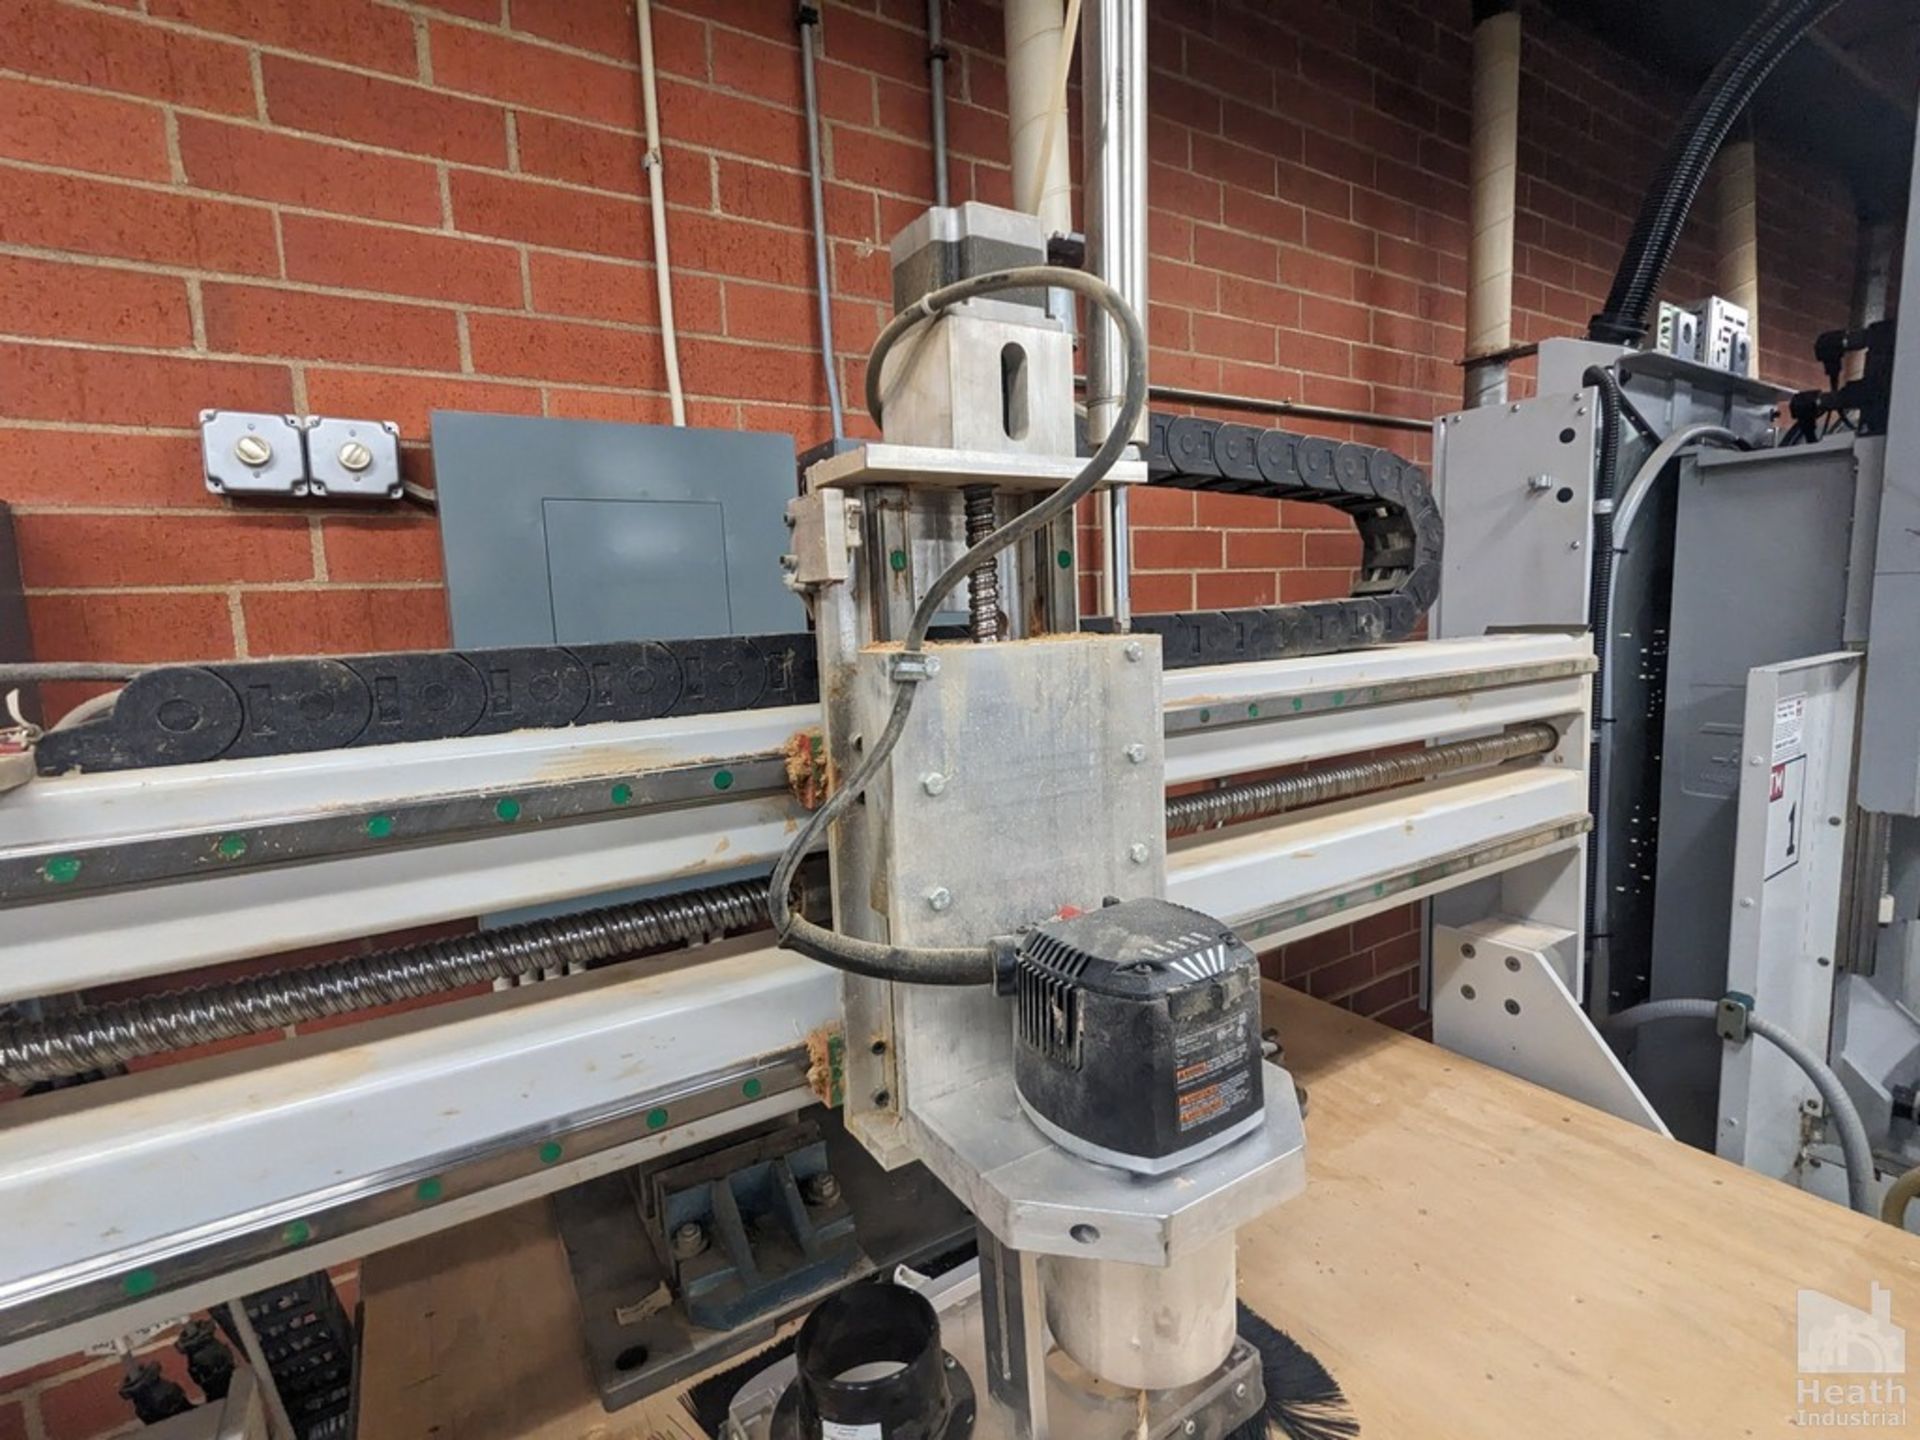 SABRE MODEL 3636 CNC WOOD ROUTER WITH PORTABLE TABLE Loading Fee :$100 - Image 2 of 6